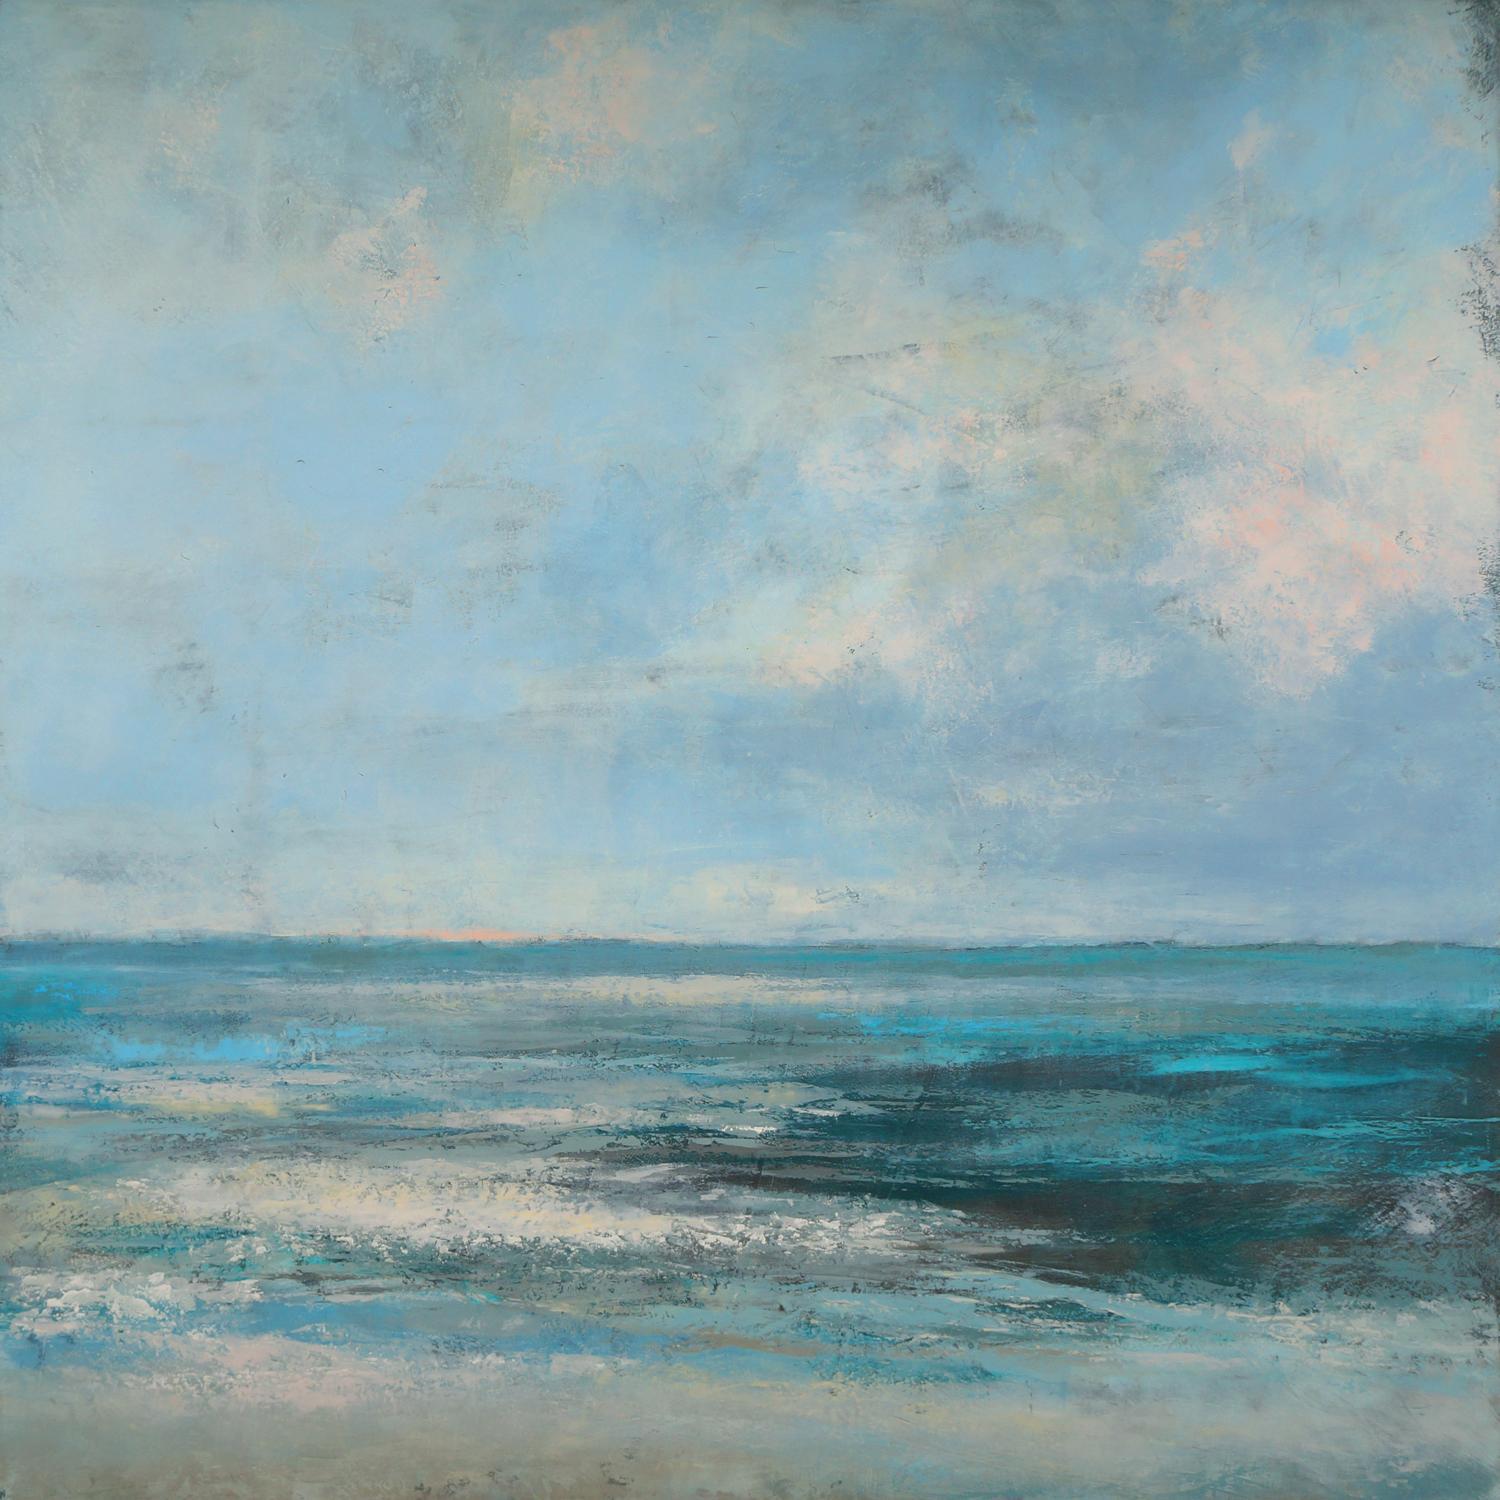 Blue Serenade
36.0 x 36.0 x 1.5, 10.0 lbs 
Oil Paint
Hand signed by artist 

Description:
An original oil painting by Victoria Primicias. Influcened by the syle of the Impressionists, this calming landscape depicts the turquoise ocean.

Artist's